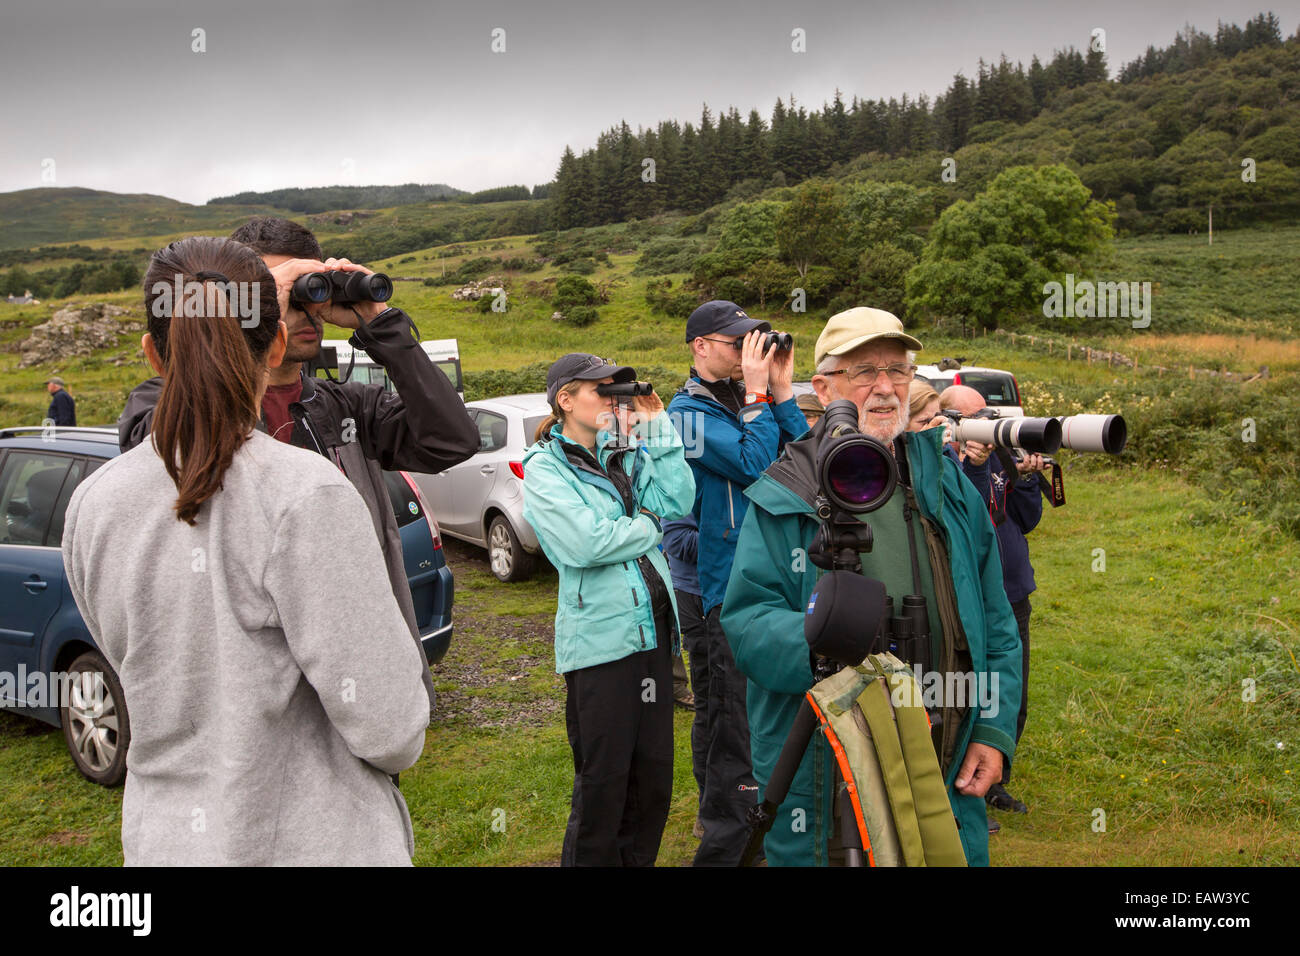 An Isle of Mull Wildlife tour showing the islands wildlife to tourists, Isle of Mull, Scotland, UK. Stock Photo